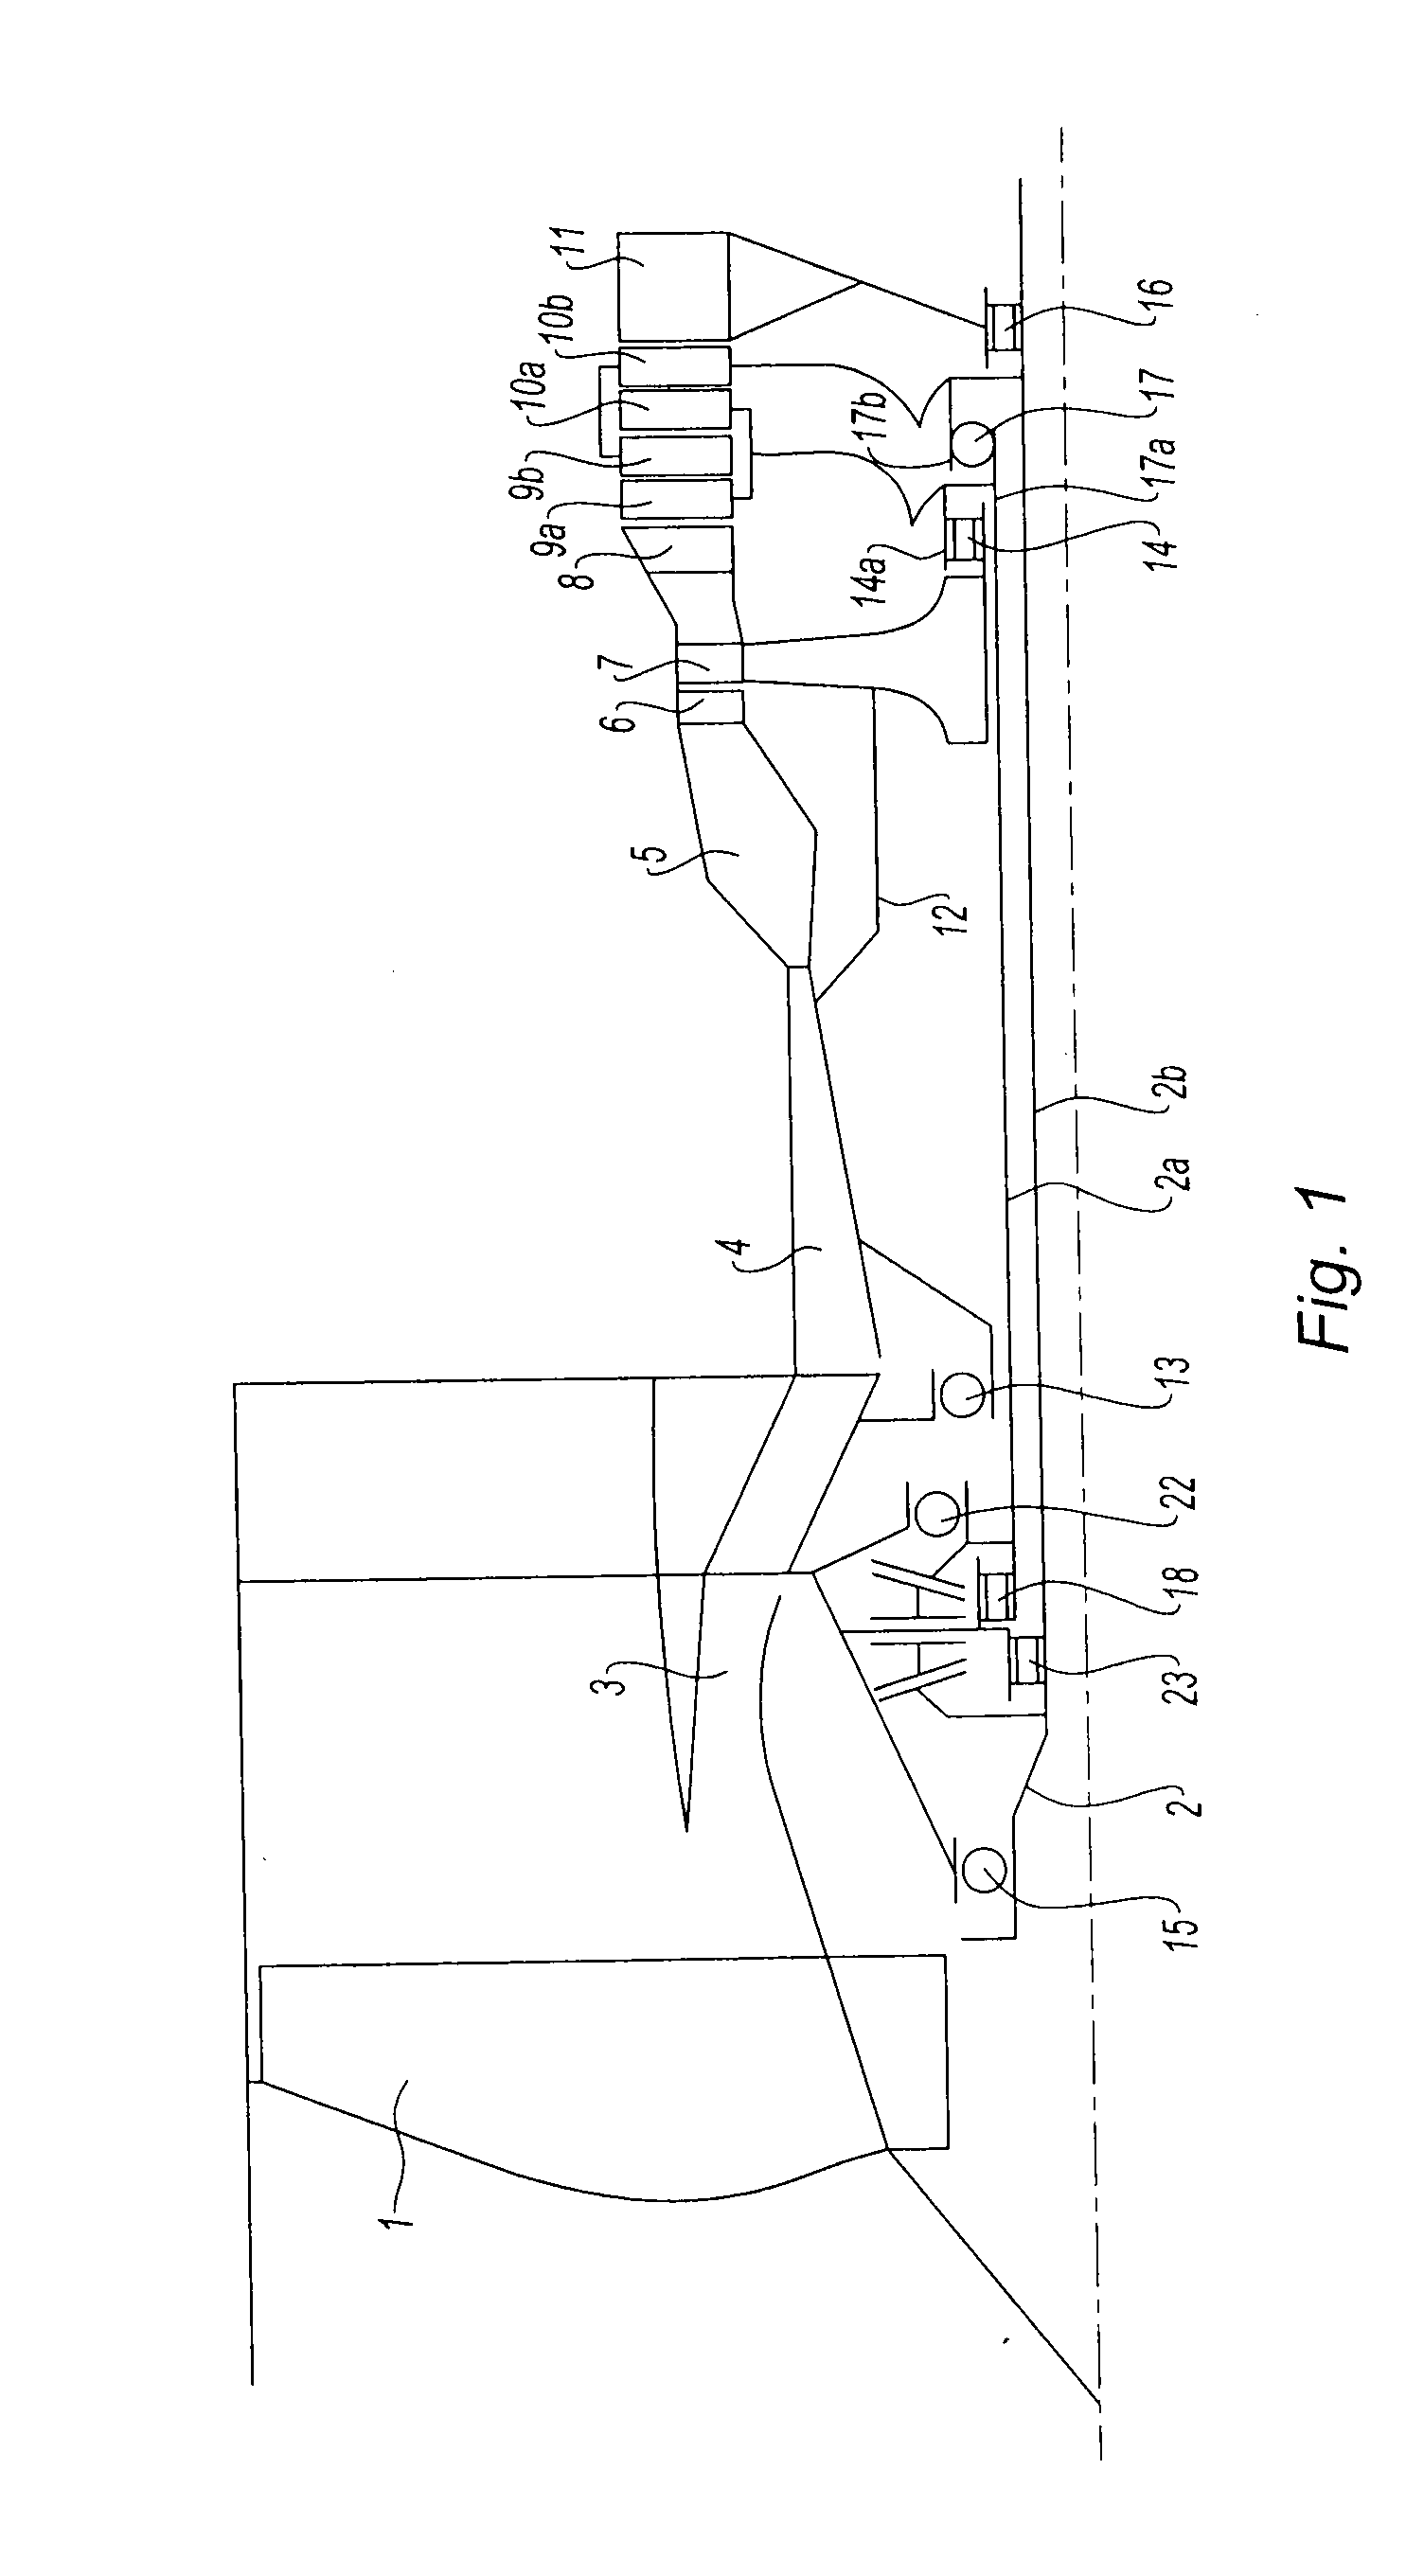 Bypass engine with contrarotating turbine wheels